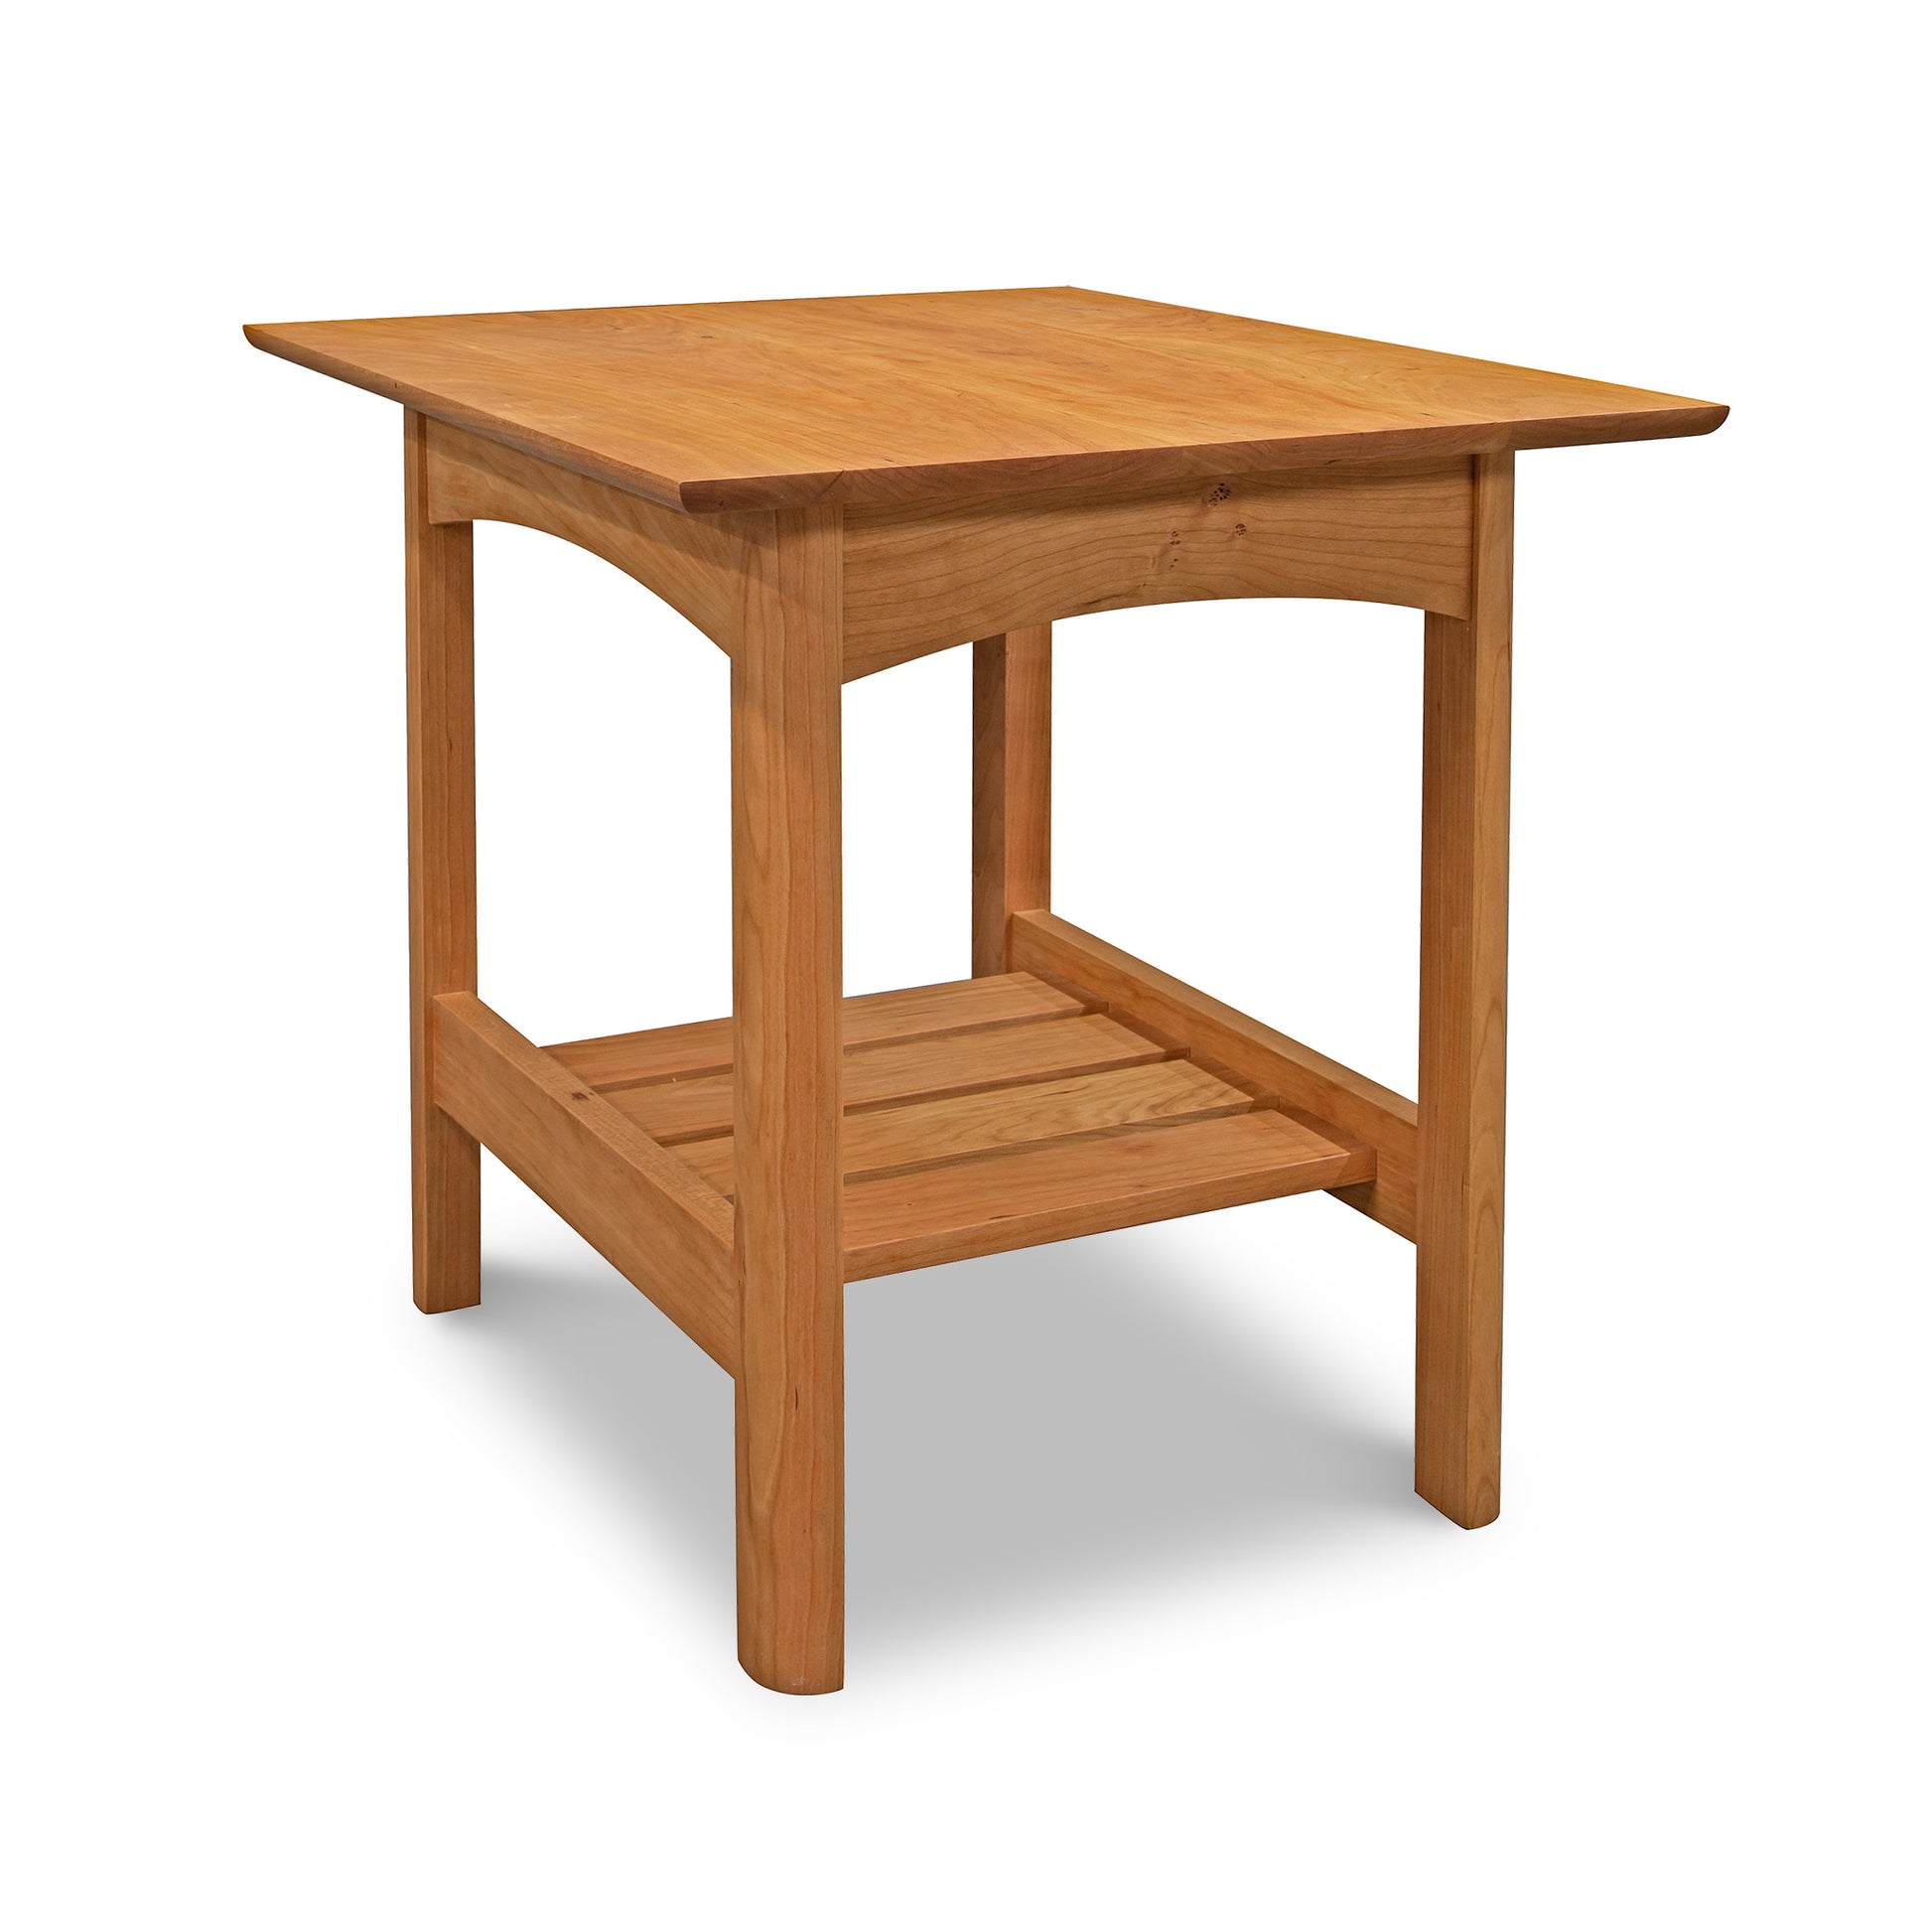 A Heartwood Shaker Lamp Table from Vermont Furniture Designs, with a square top and a lower shelf, isolated on a white background.